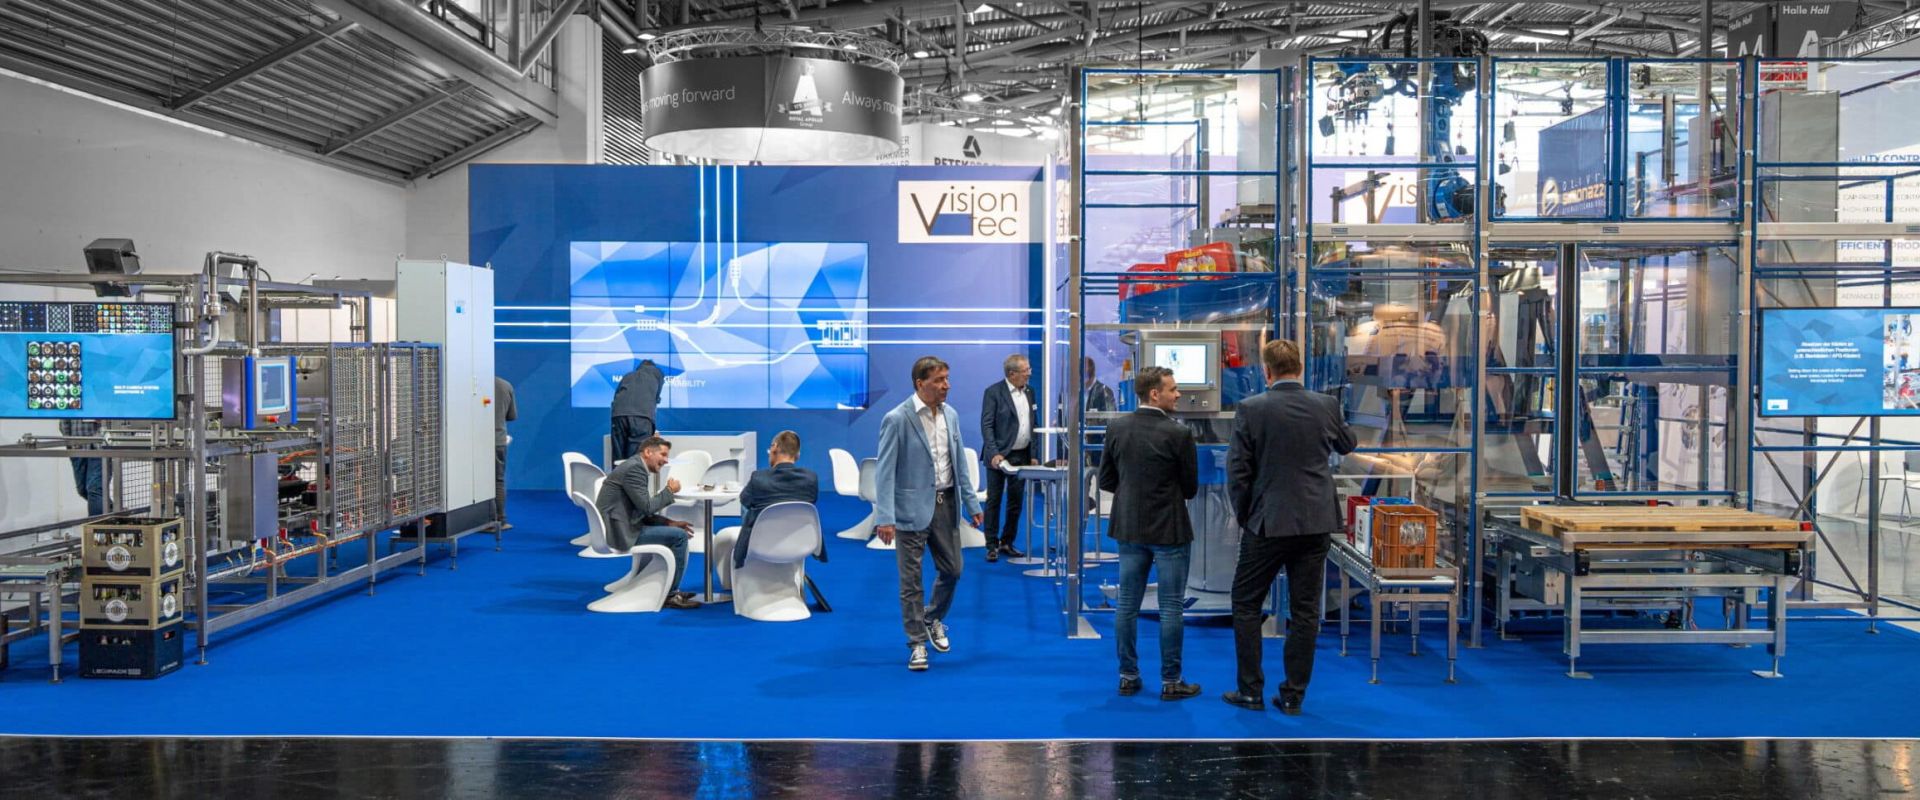 Vision-tech booth at drinktec trade fair in Munich